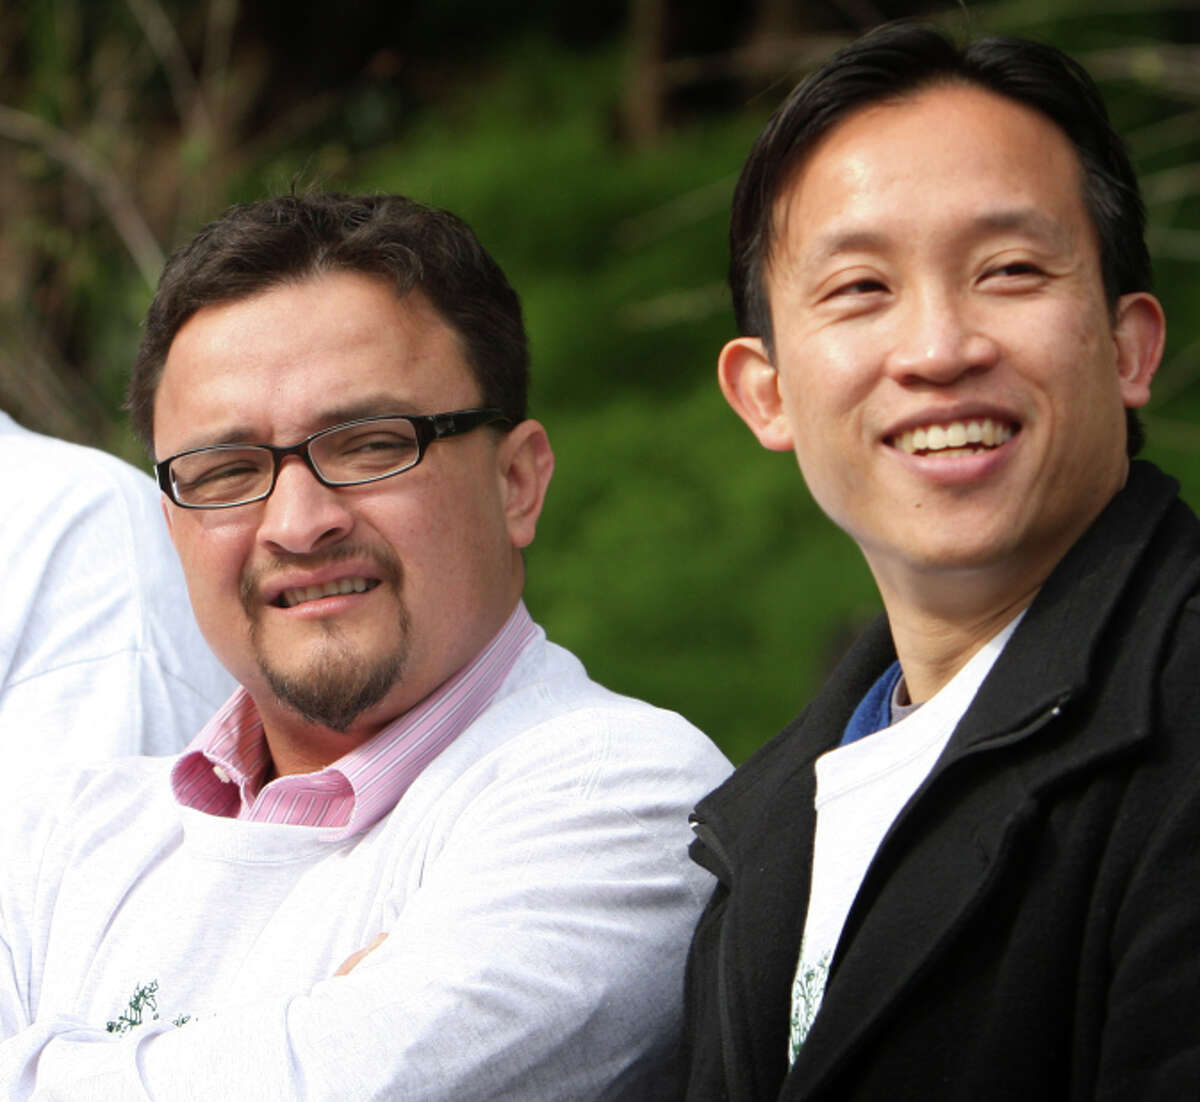 Combatants David Campos (left) and David Chiu have a whole lot in common.